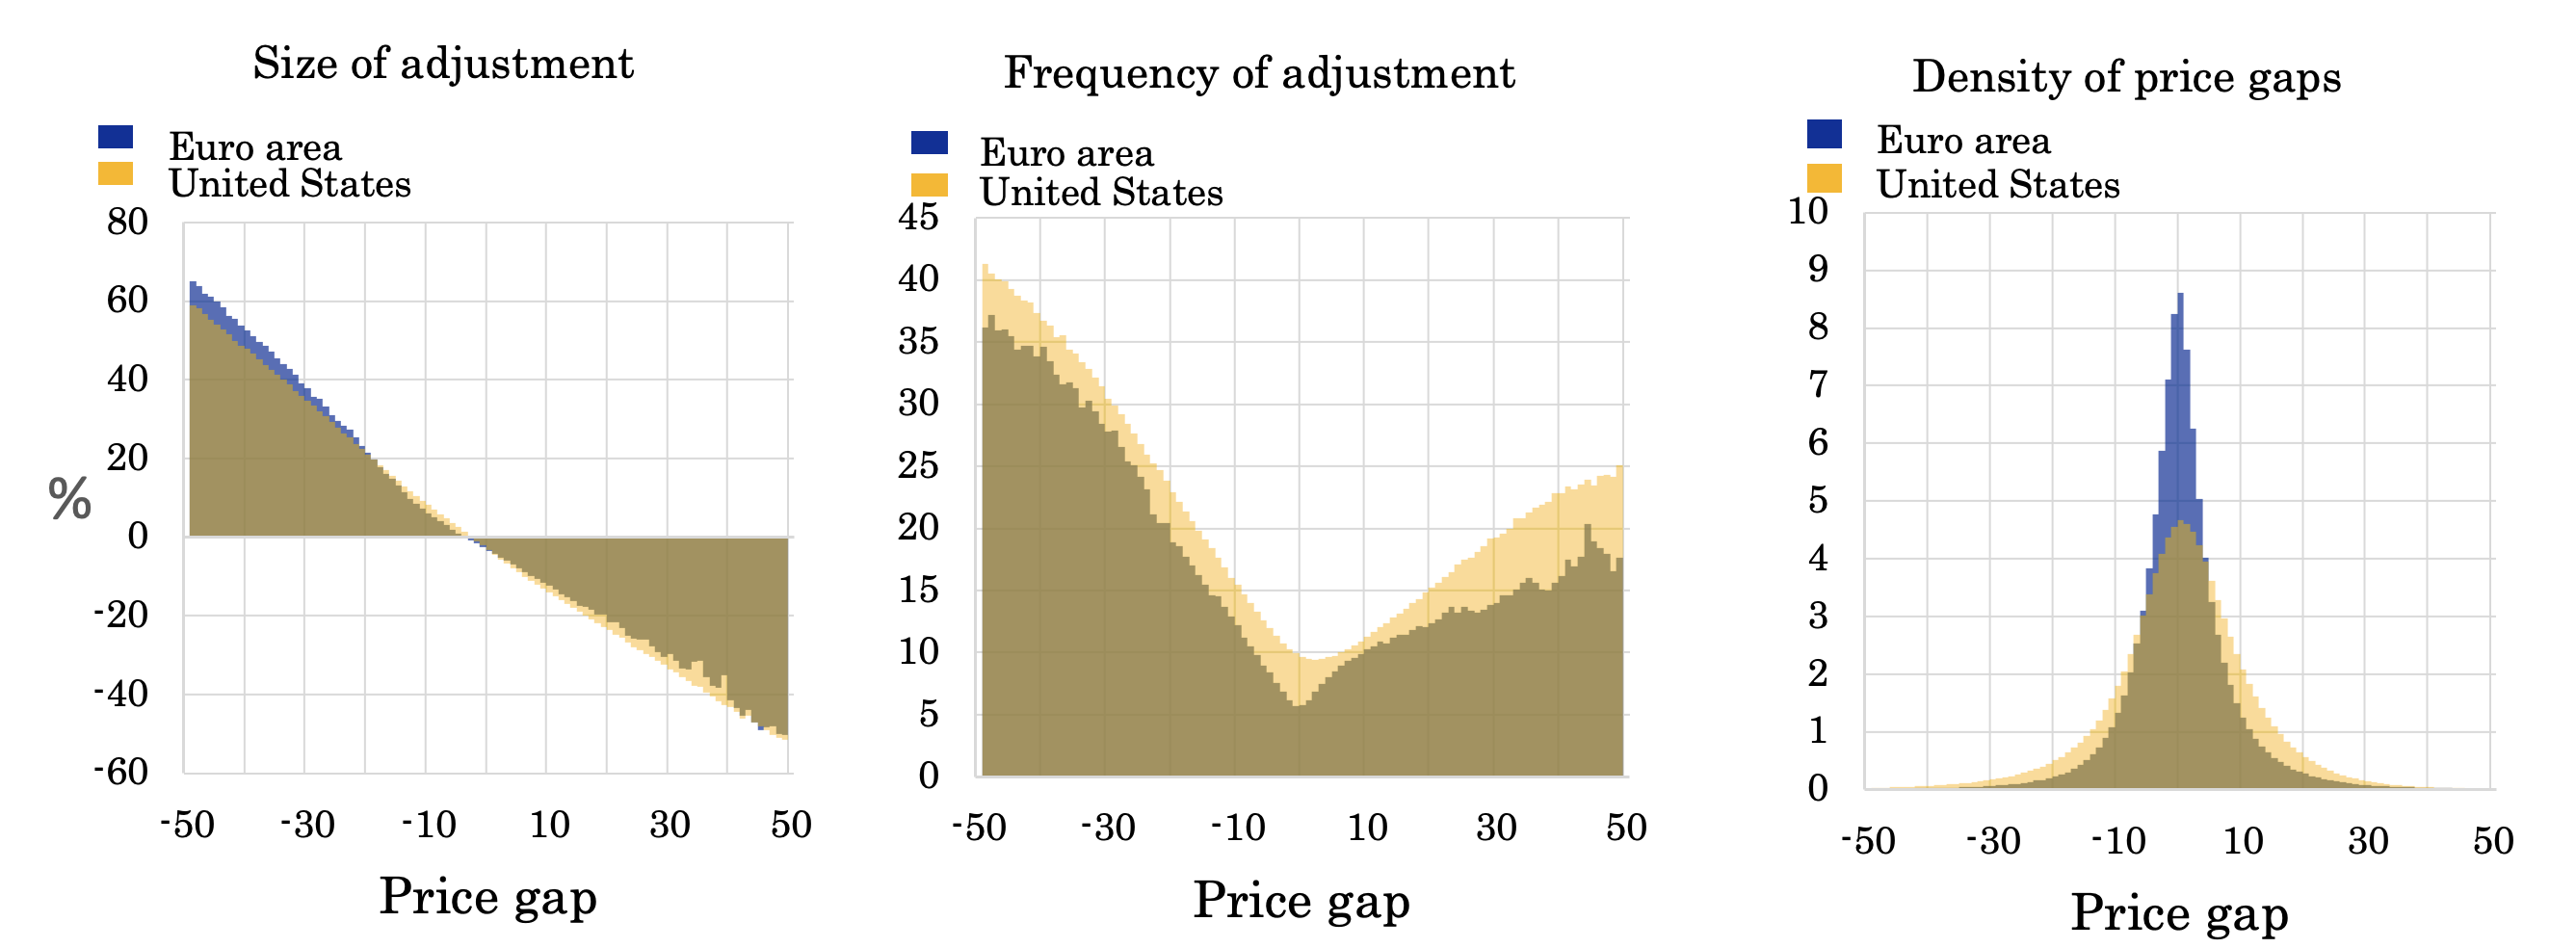 Figure 1 Size and probability of price adjustment as a function of the price gap and its density